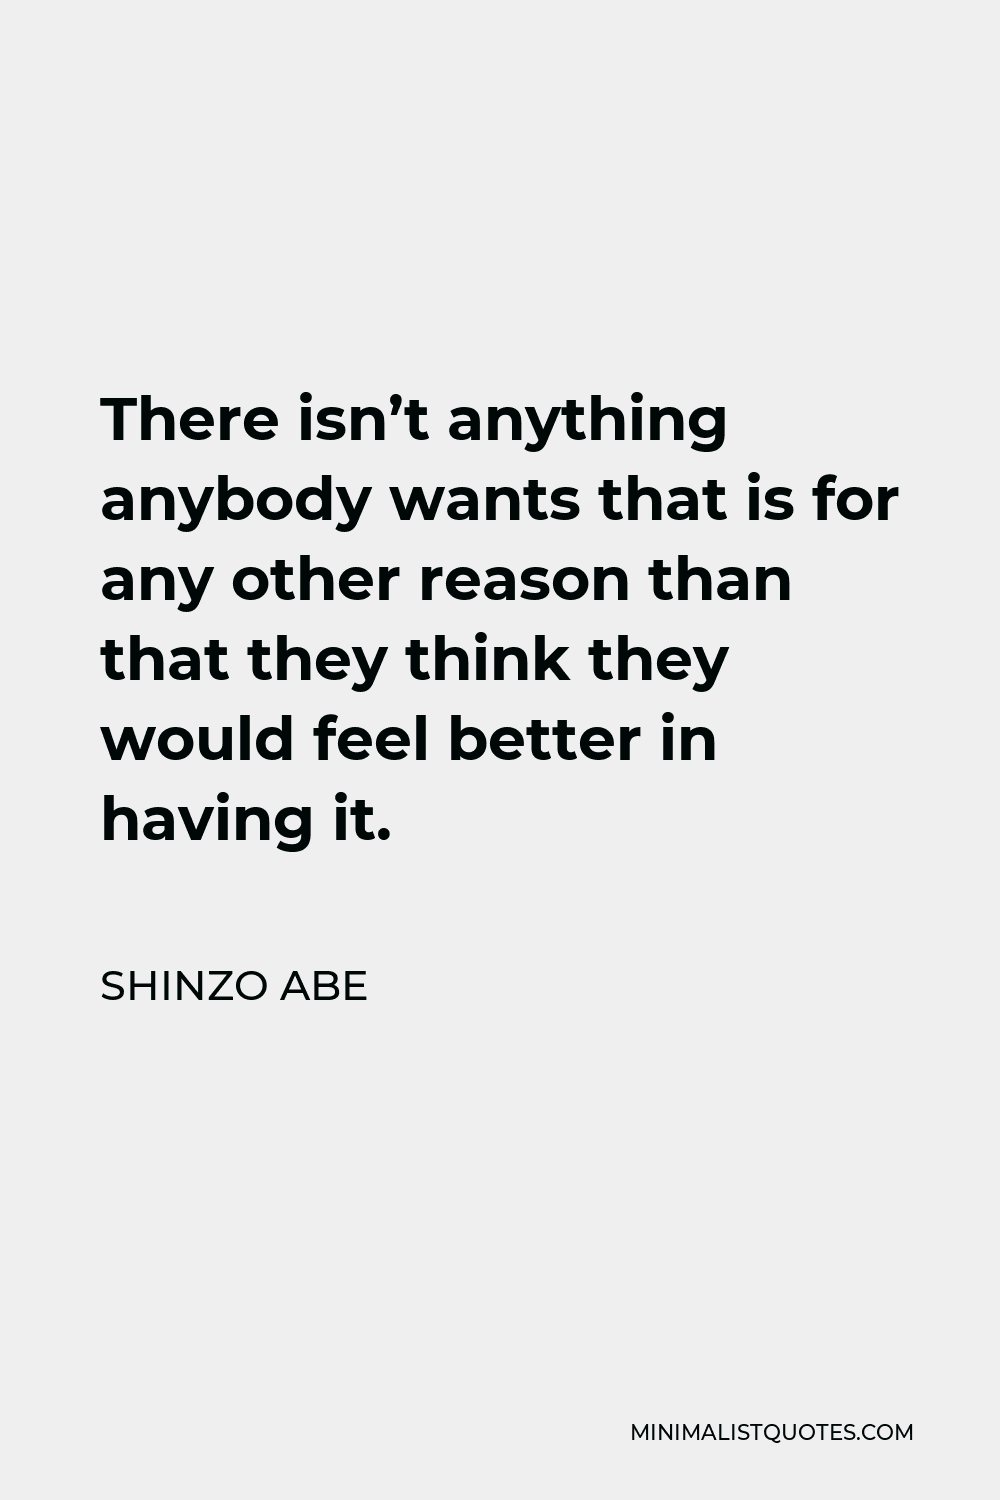 Shinzo Abe Quote - There isn’t anything anybody wants that is for any other reason than that they think they would feel better in having it.